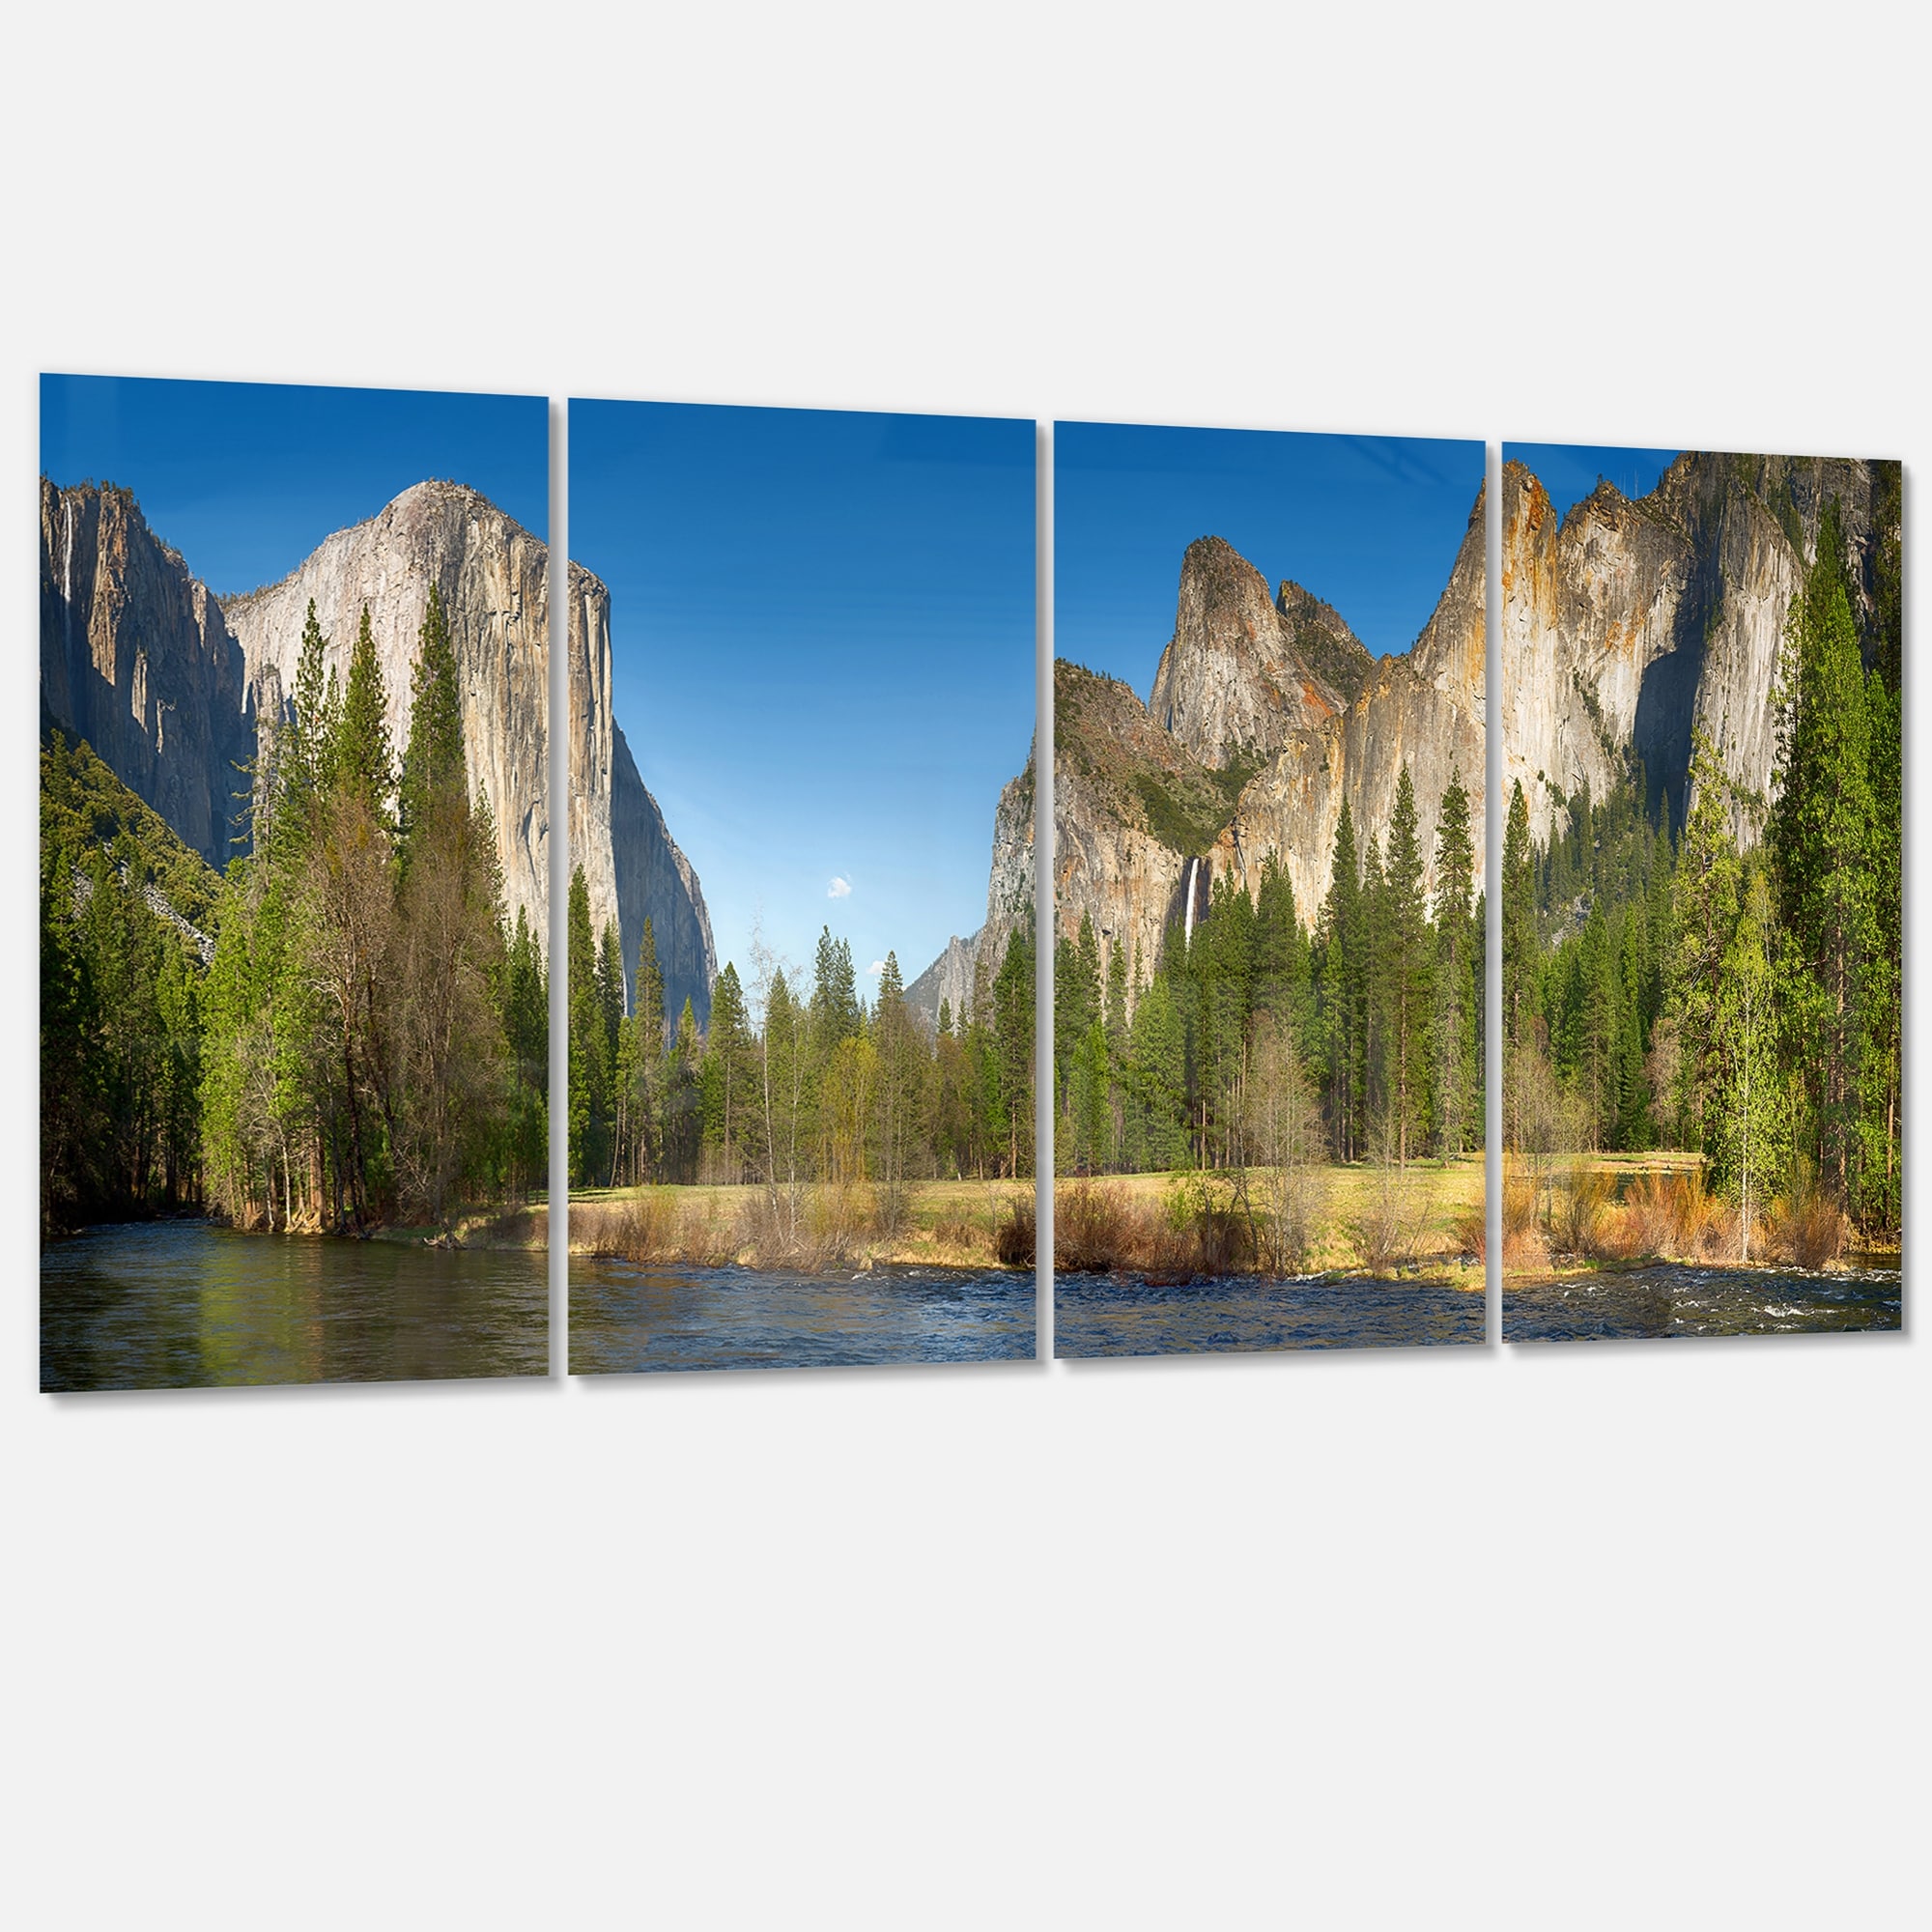 https://ak1.ostkcdn.com/images/products/is/images/direct/29e42fb59514e8740af528f611fde6f5adff9d18/Designart-%27Yosemite-Valley-Panorama%27-Landscape-Metal-Wall-Art.jpg